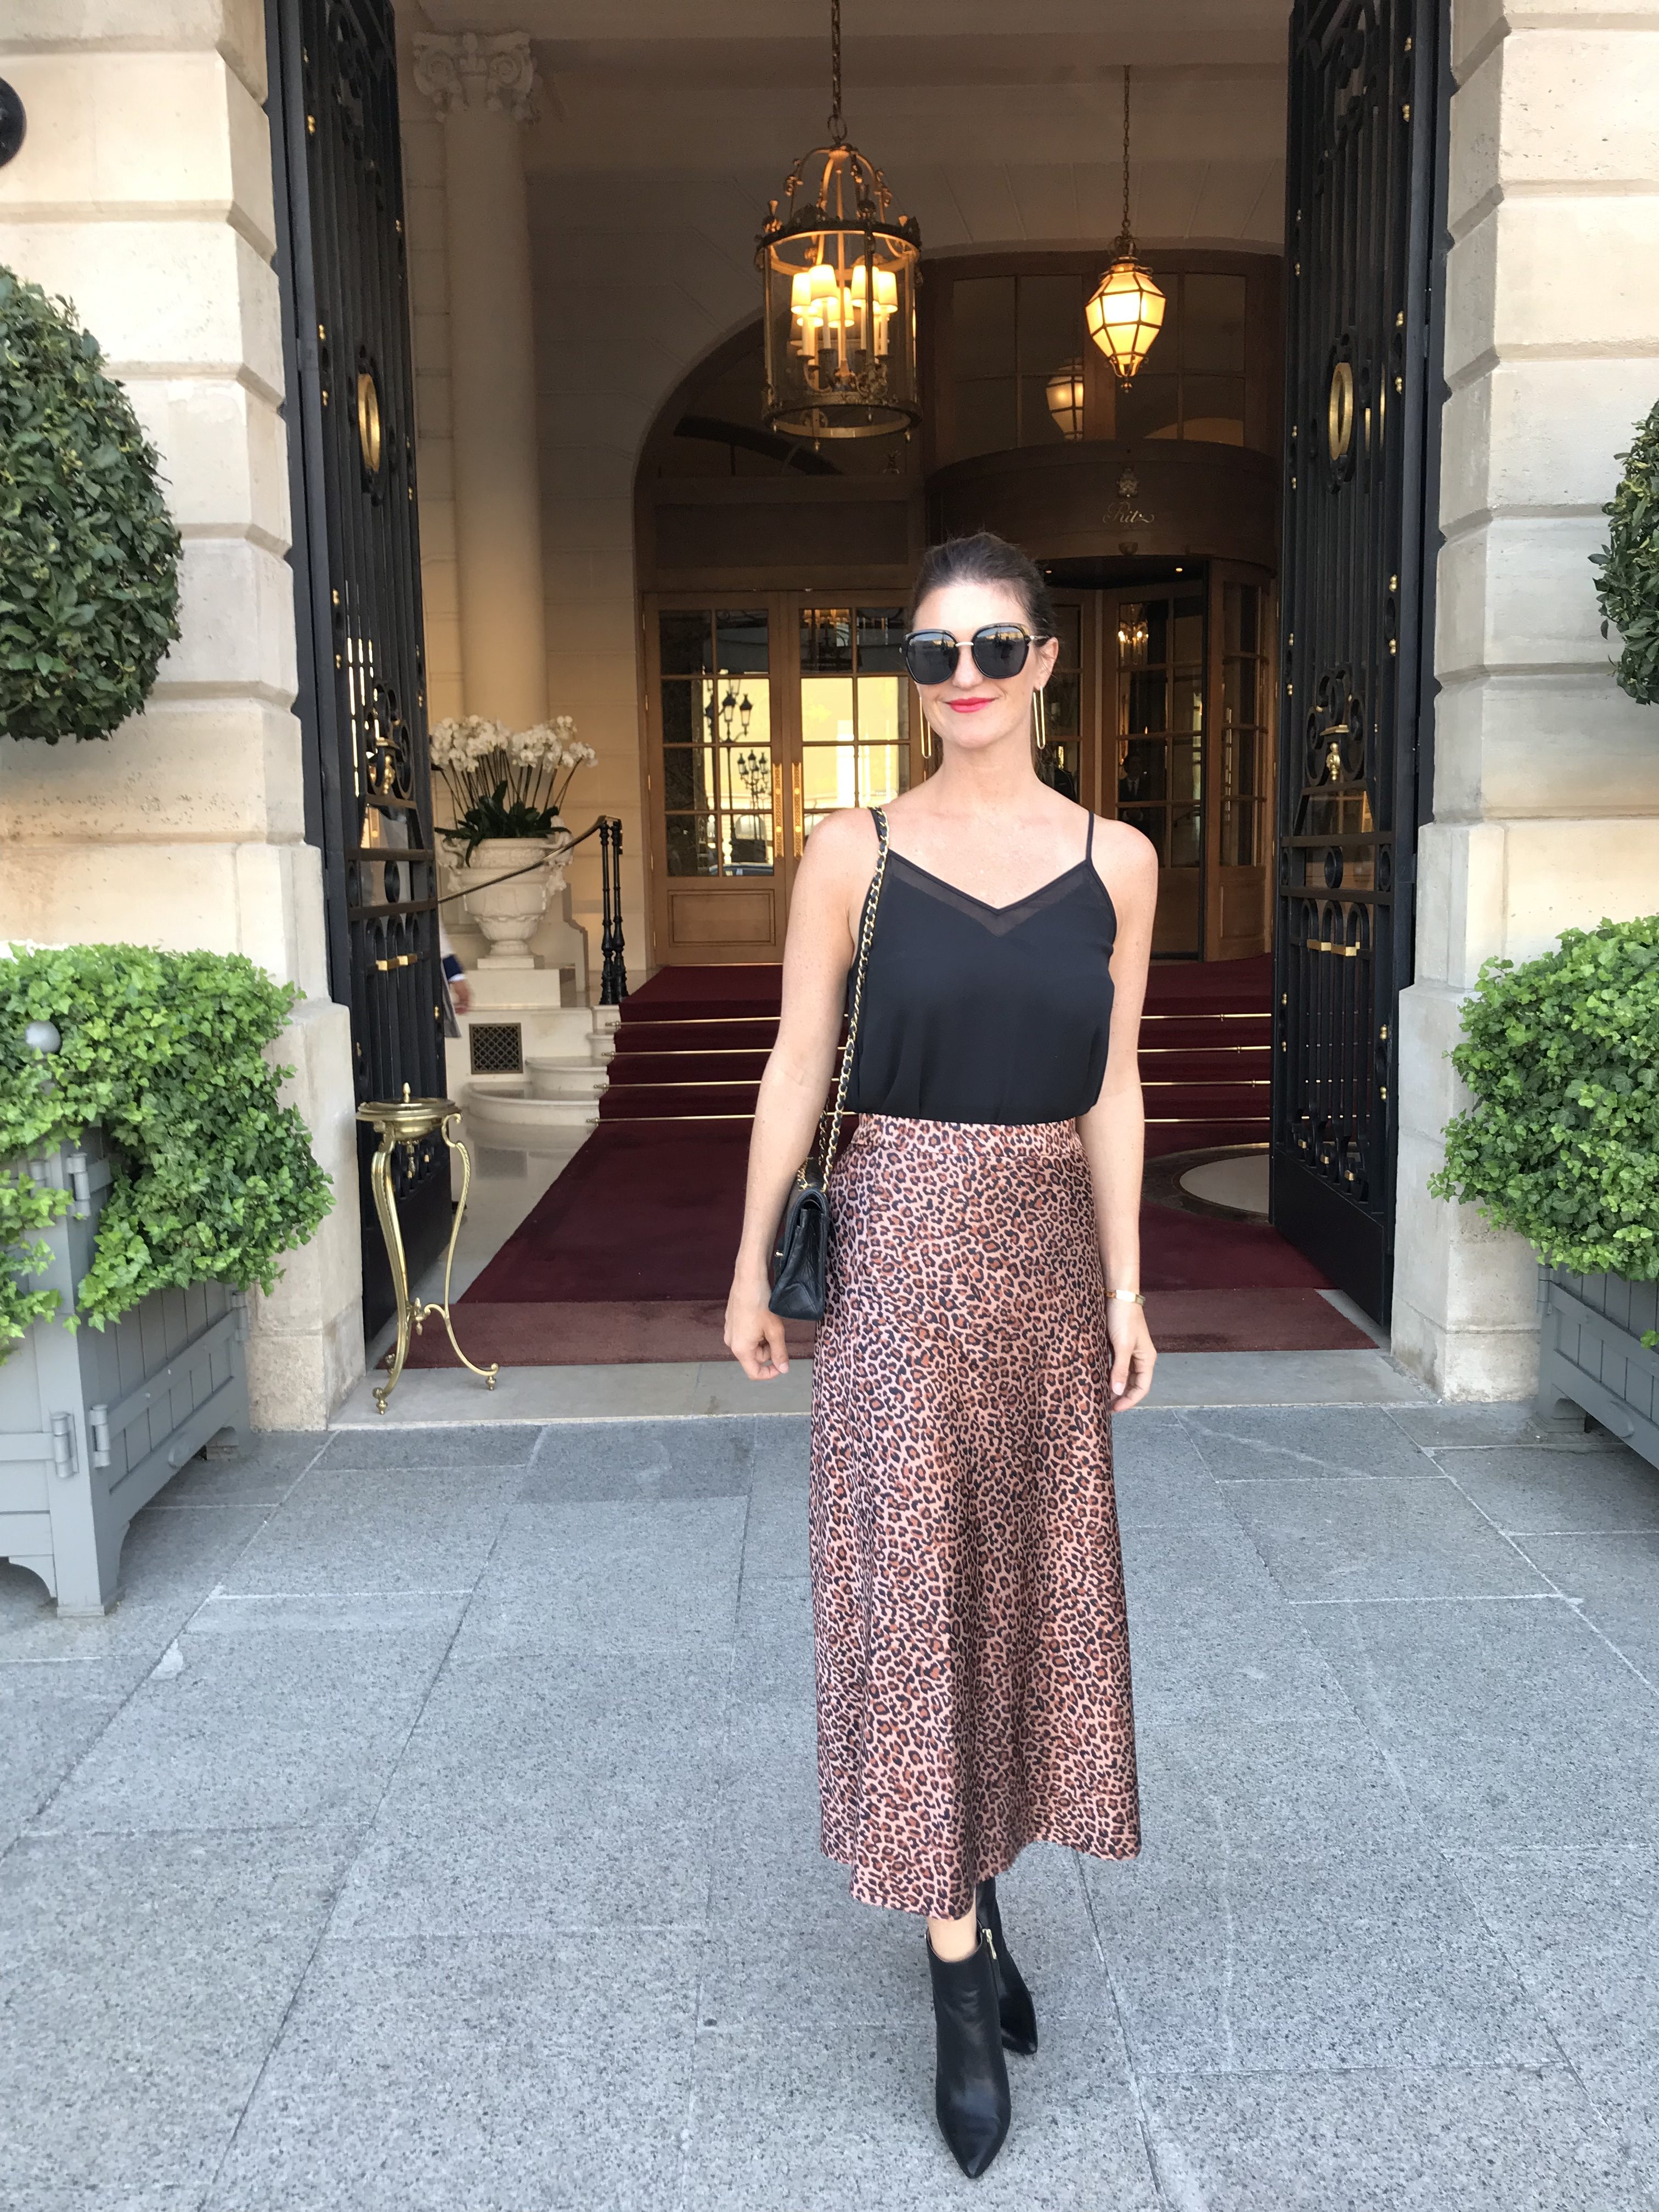 36 hours in paris. drinks at the ritz. what I wore in paris. something navy. leopard skirt